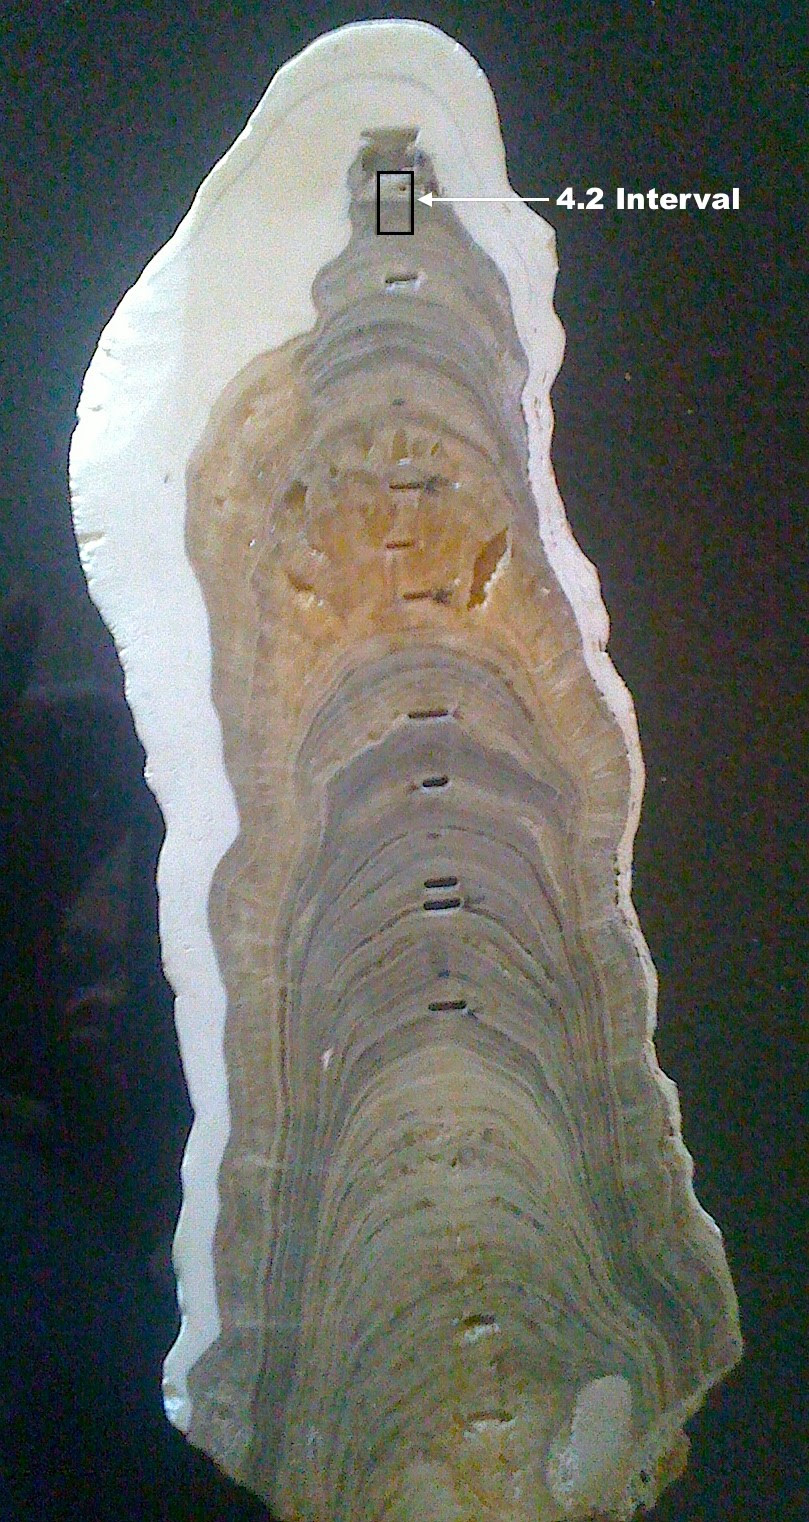 A portion of Indian stalagmite that was sectioned and analyzed layer by layer, and contains the layers chosen to define the beginning of the Late Holocene Meghalayan Age, 4,200 years ago. Credit – Stanley C. Finney, CSULB